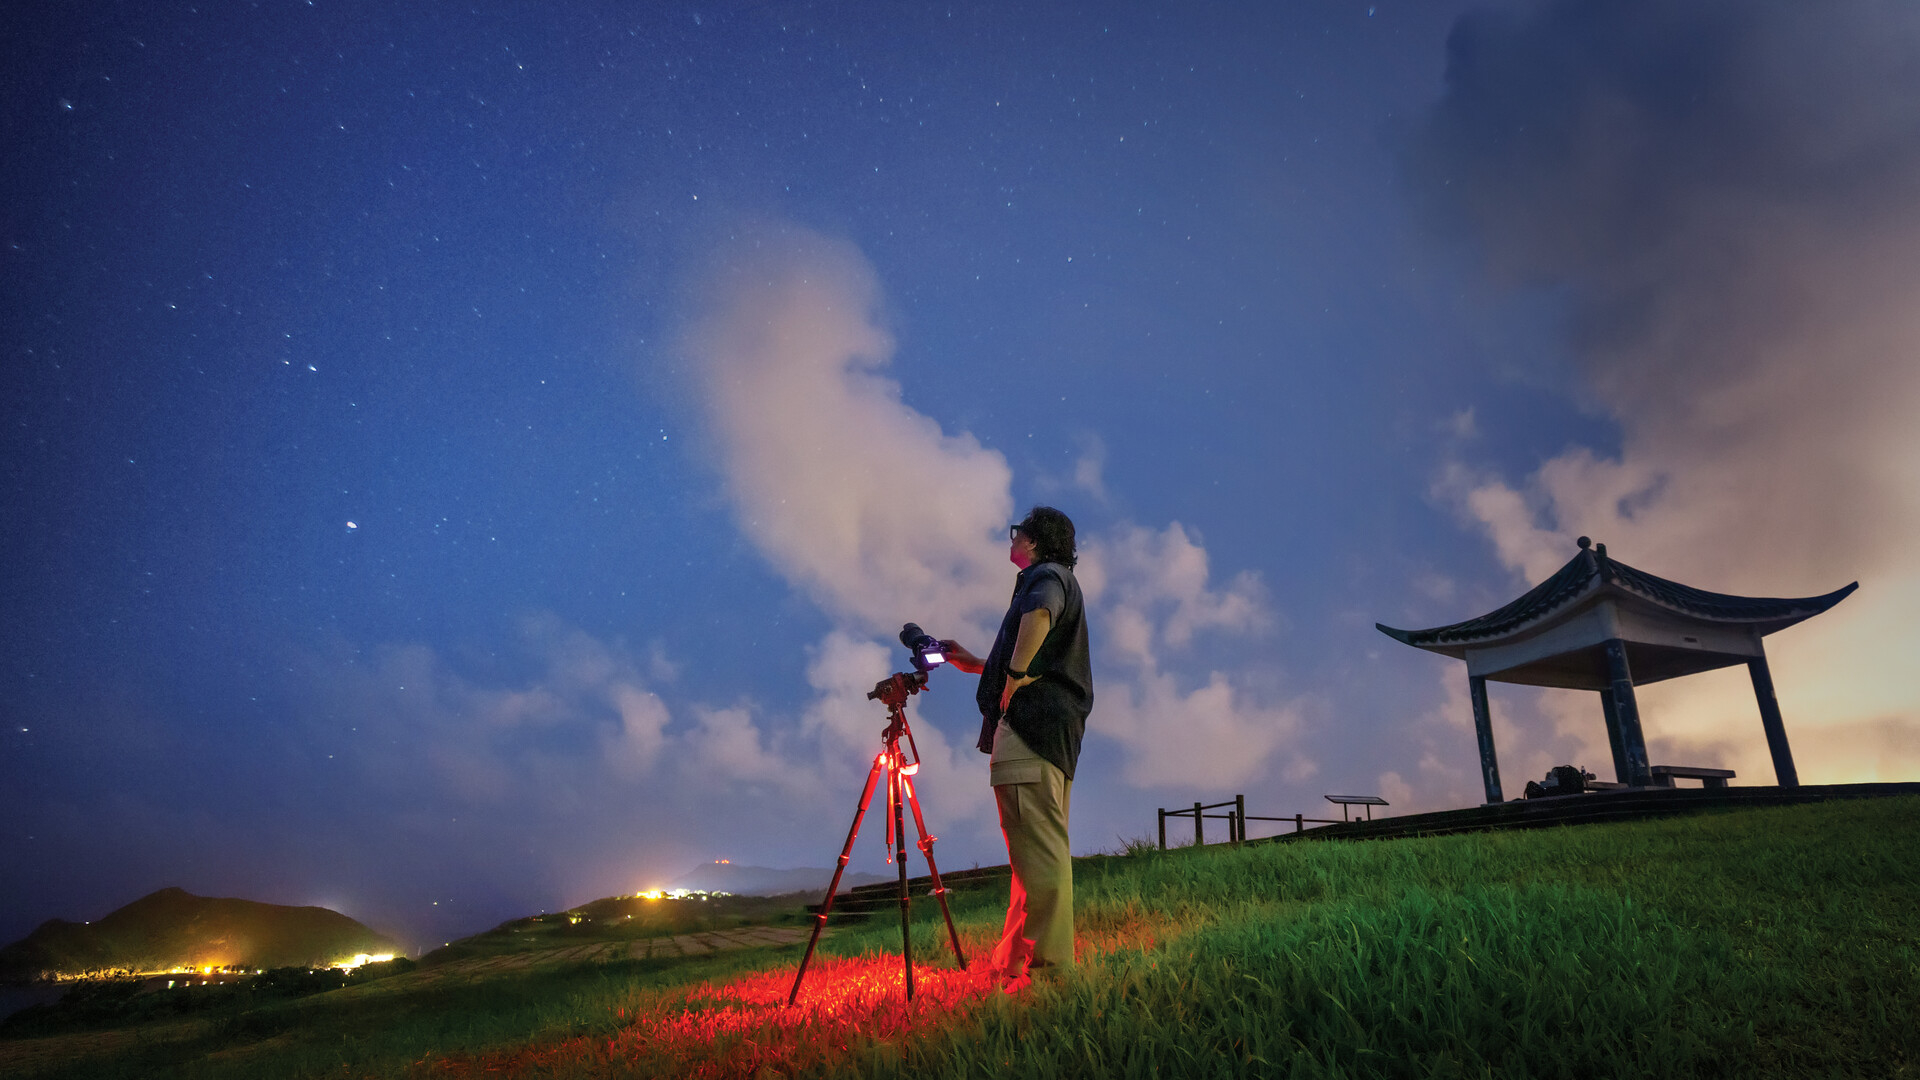 Person with a camera on a tripod under a starry sky, standing near a traditional structure